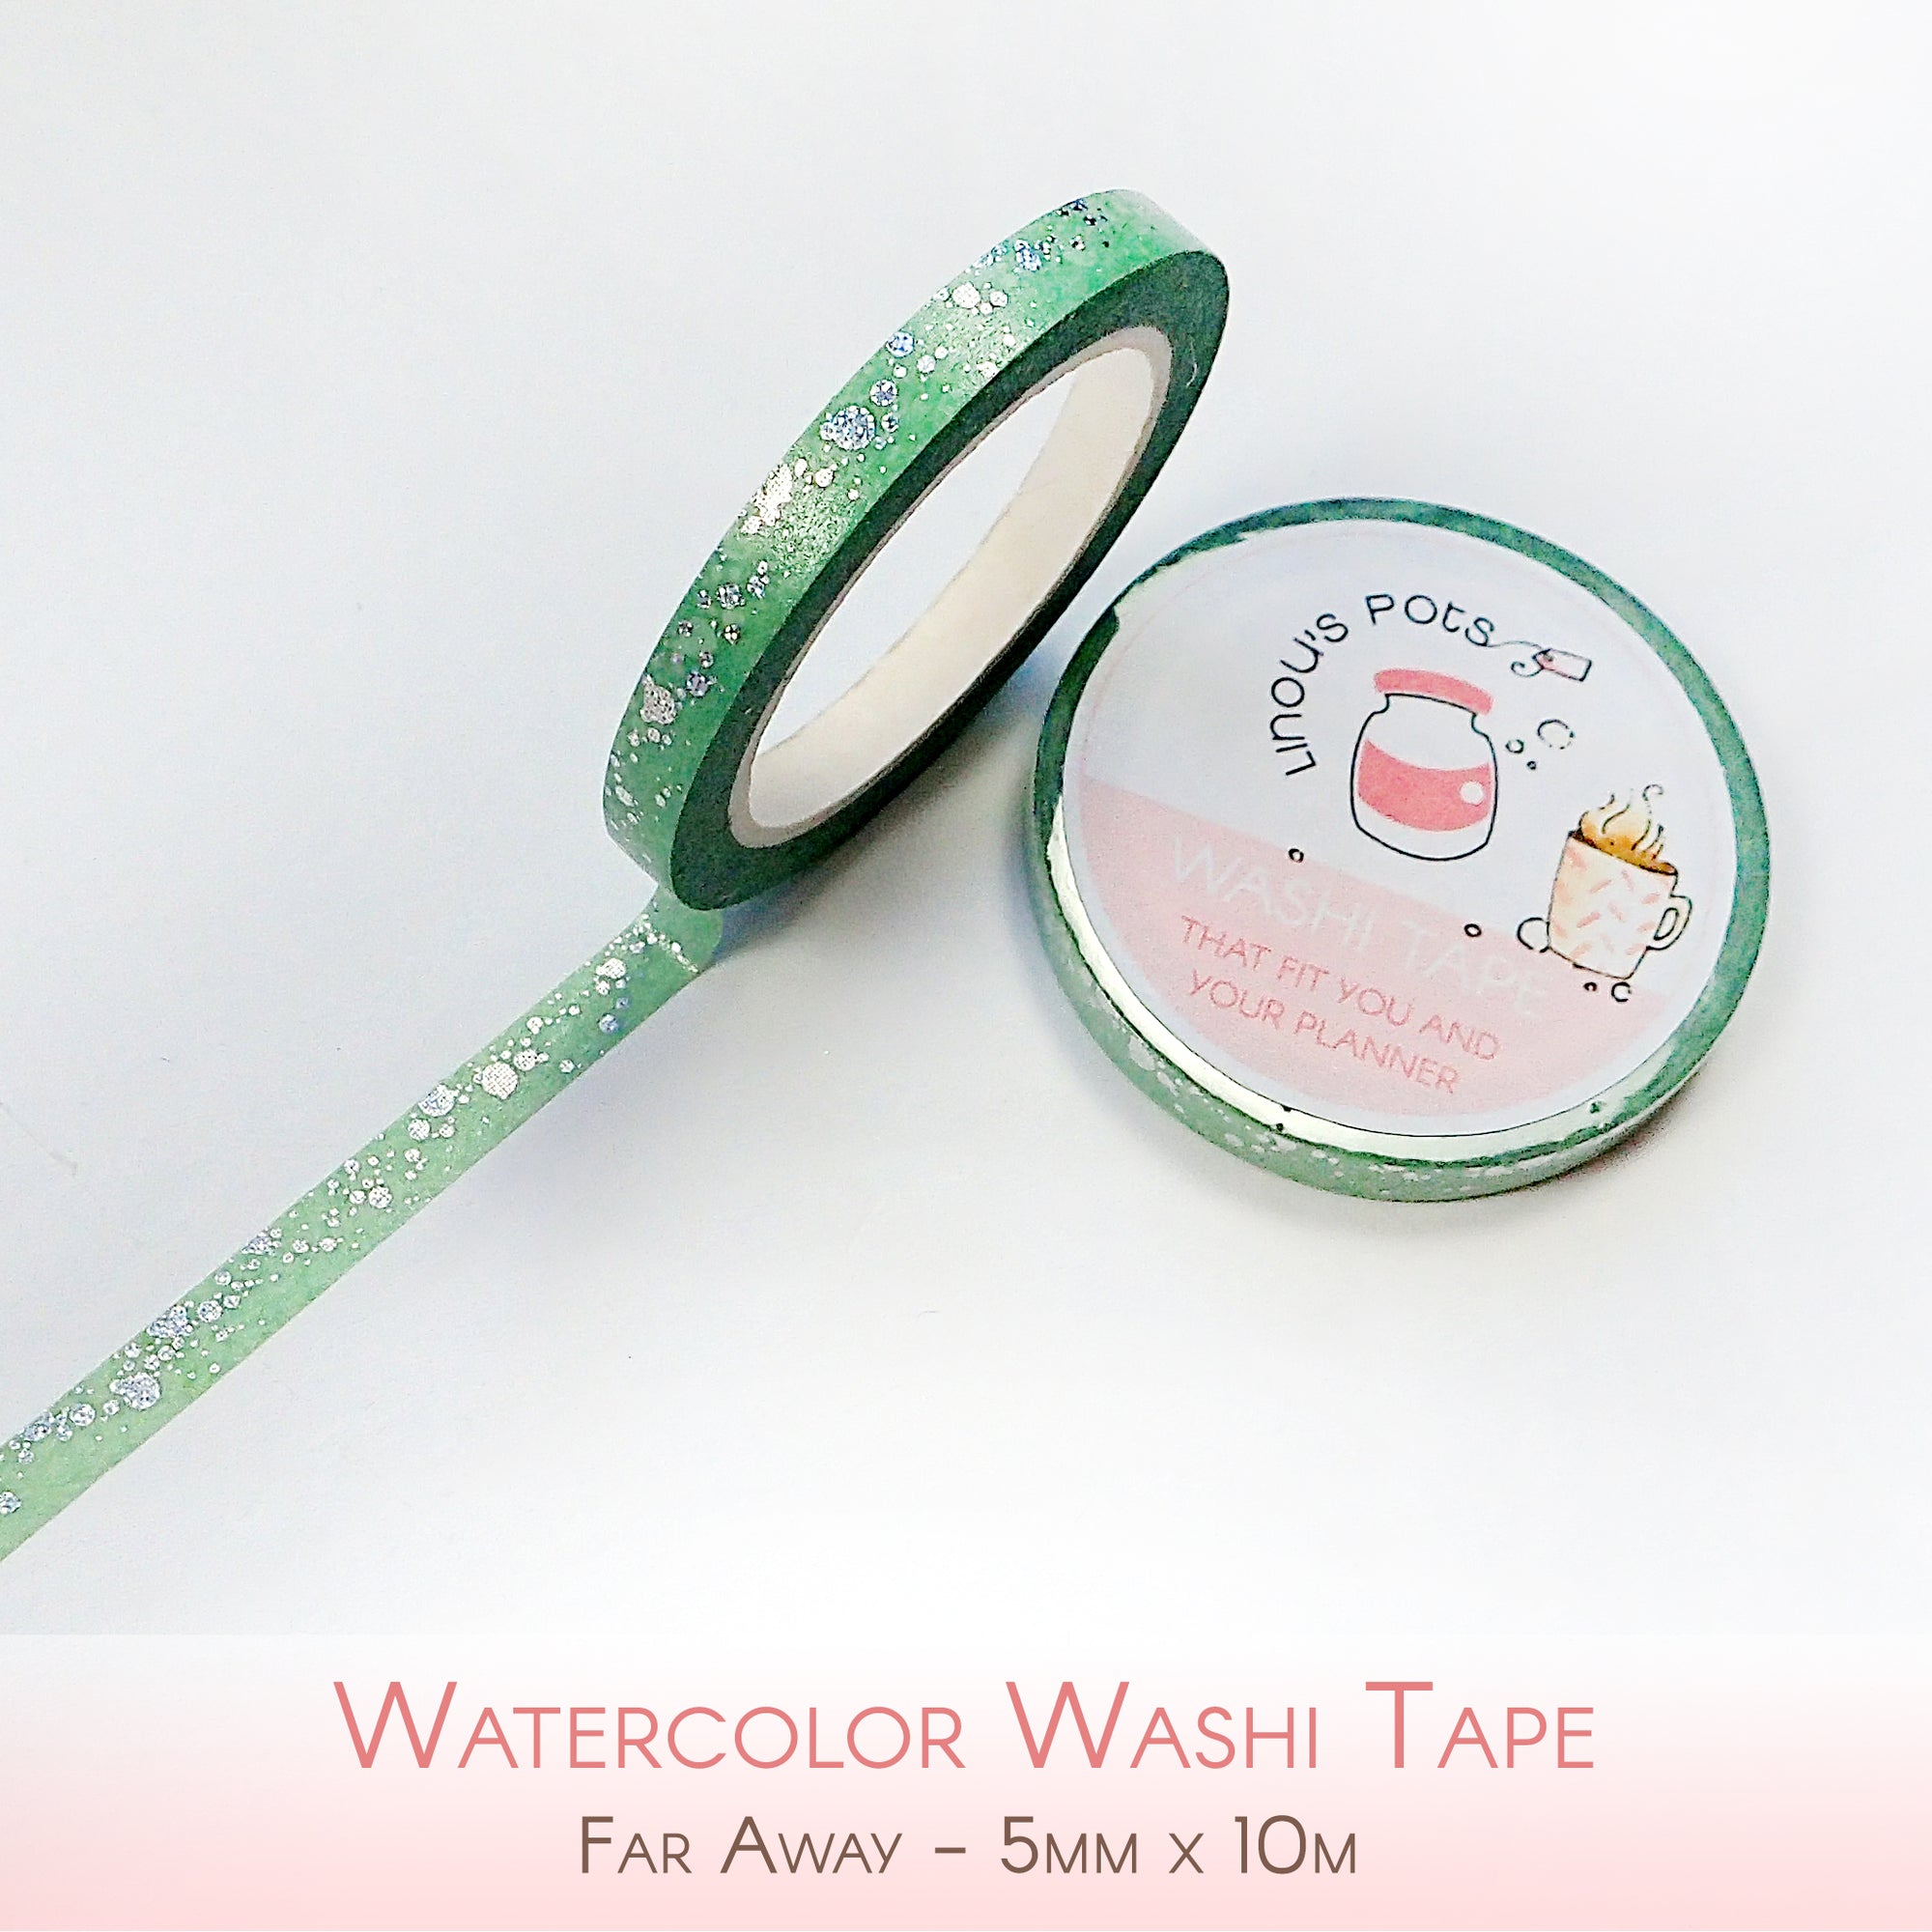 5mm foiled washi tape in turquoise tones